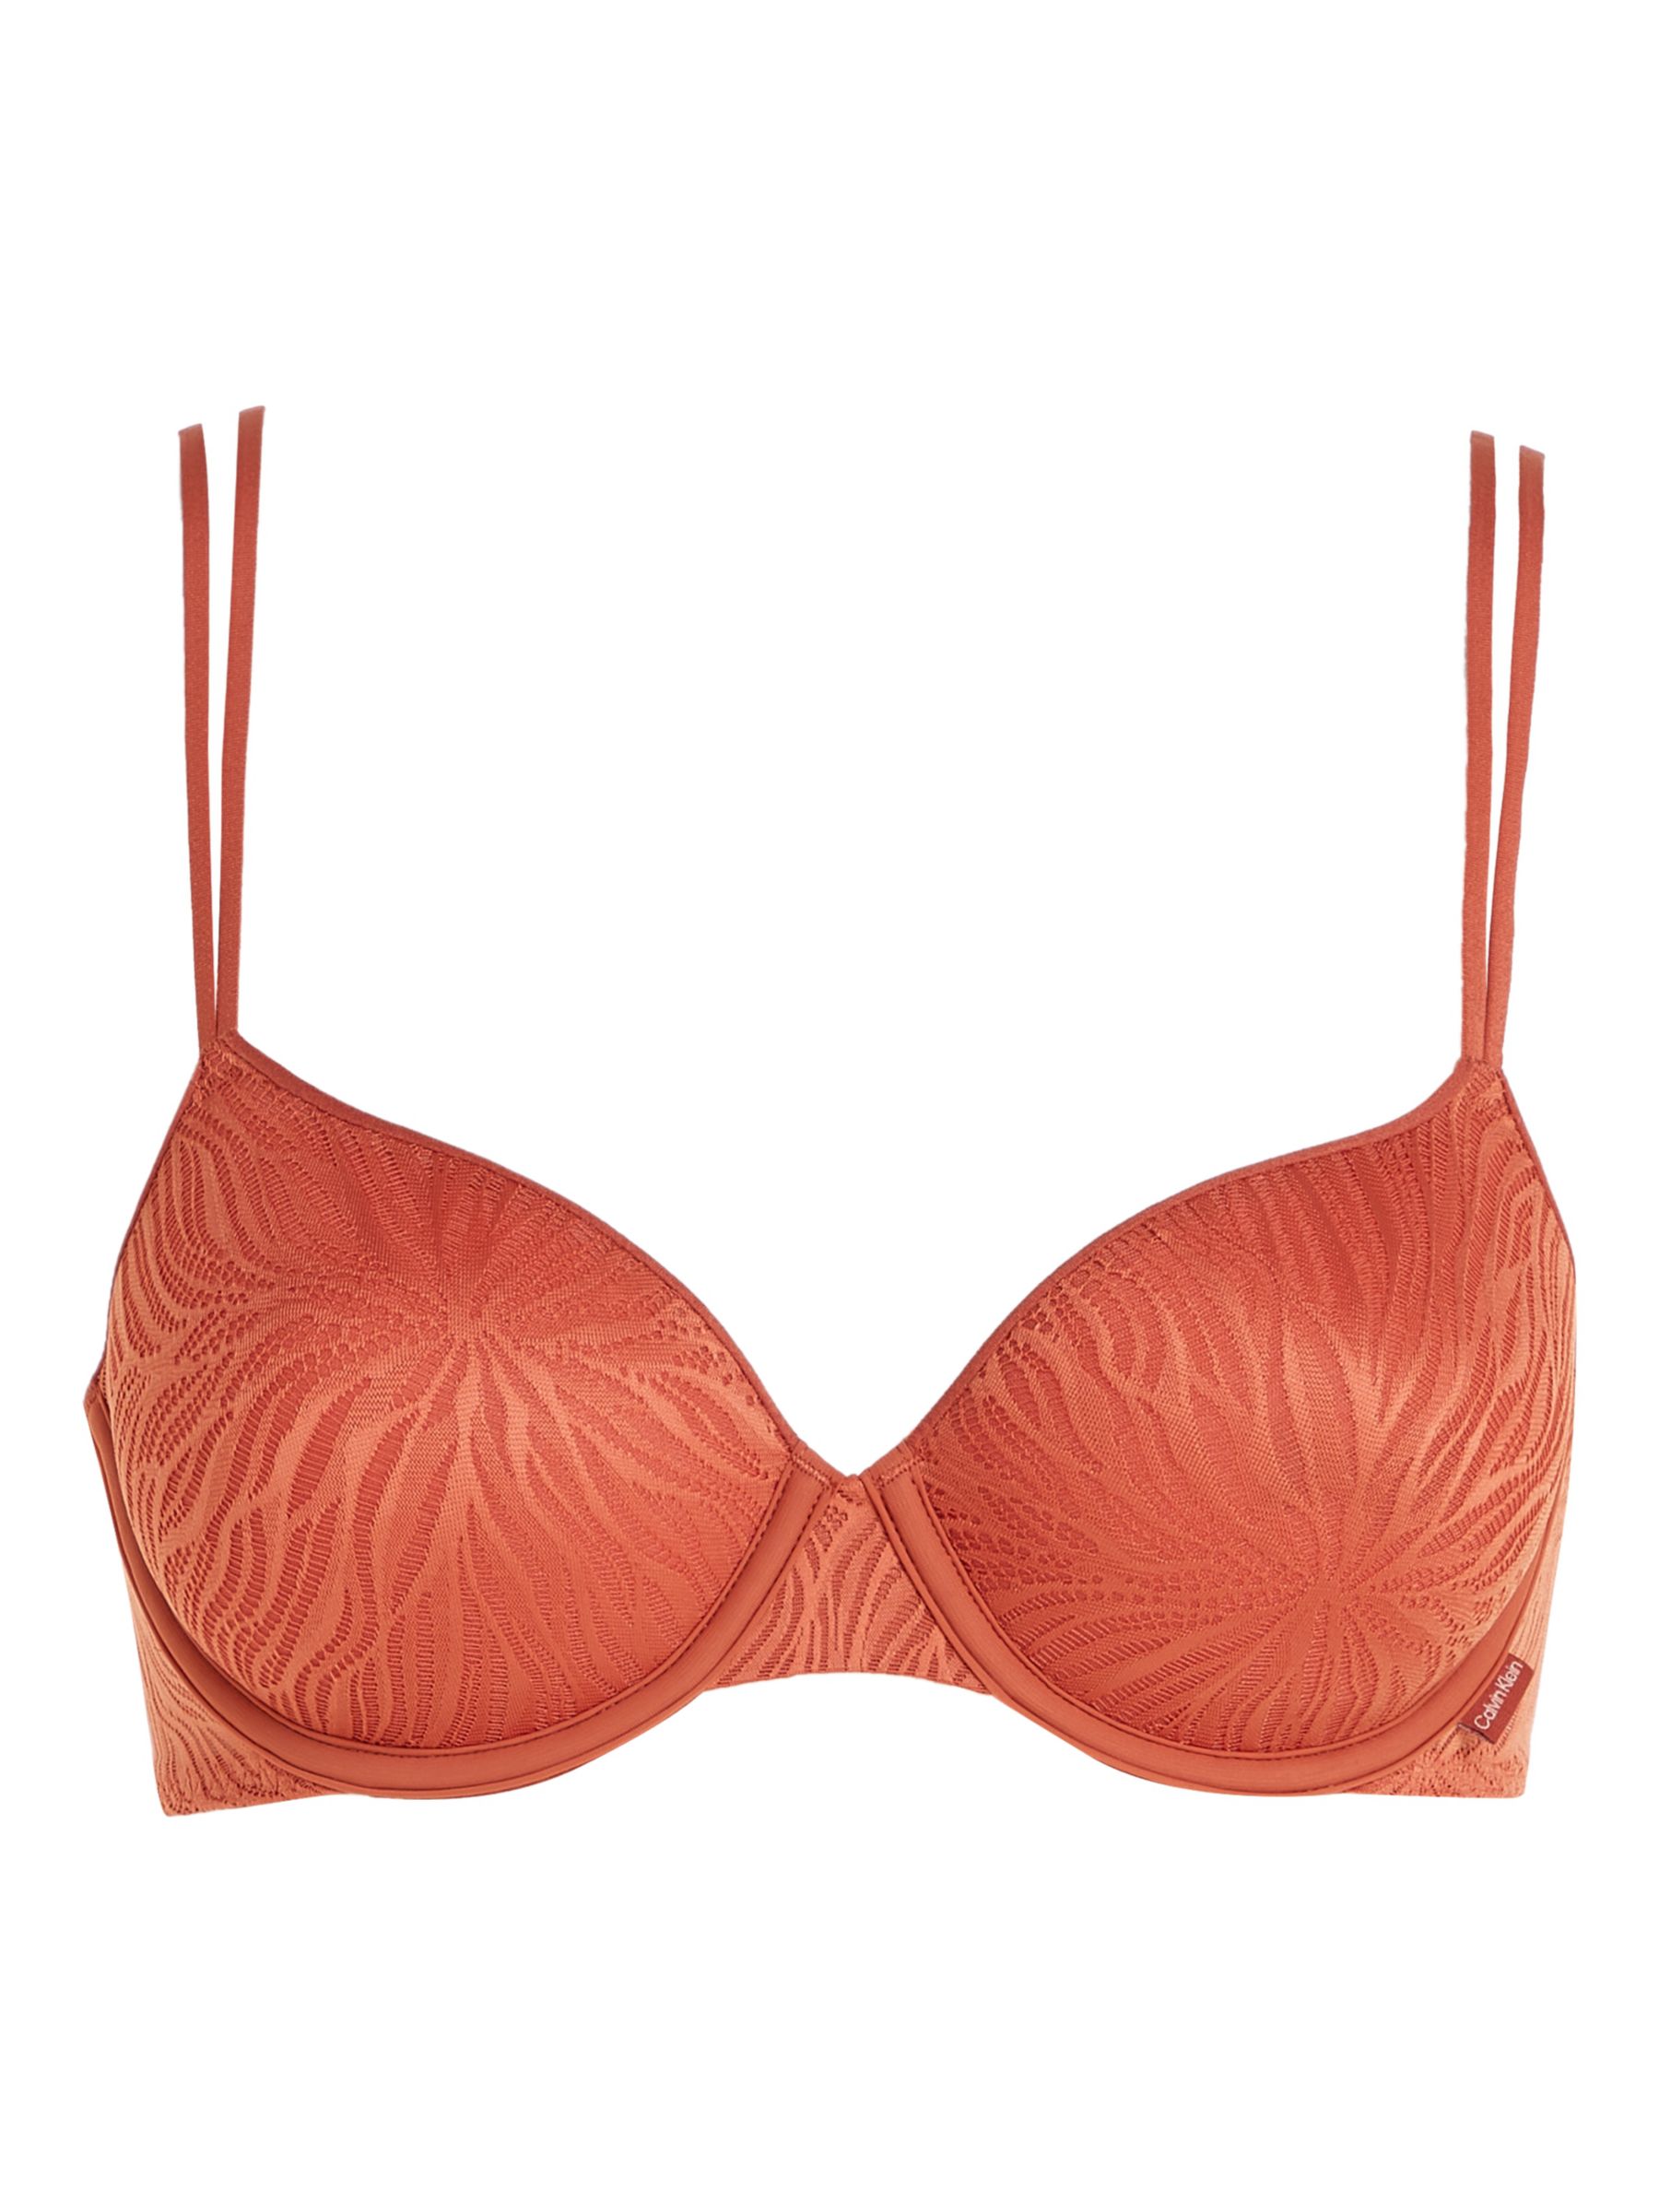 Buy Calvin Klein Pink Sheer Marquisette T-Shirt Bra from the Next UK online  shop in 2023